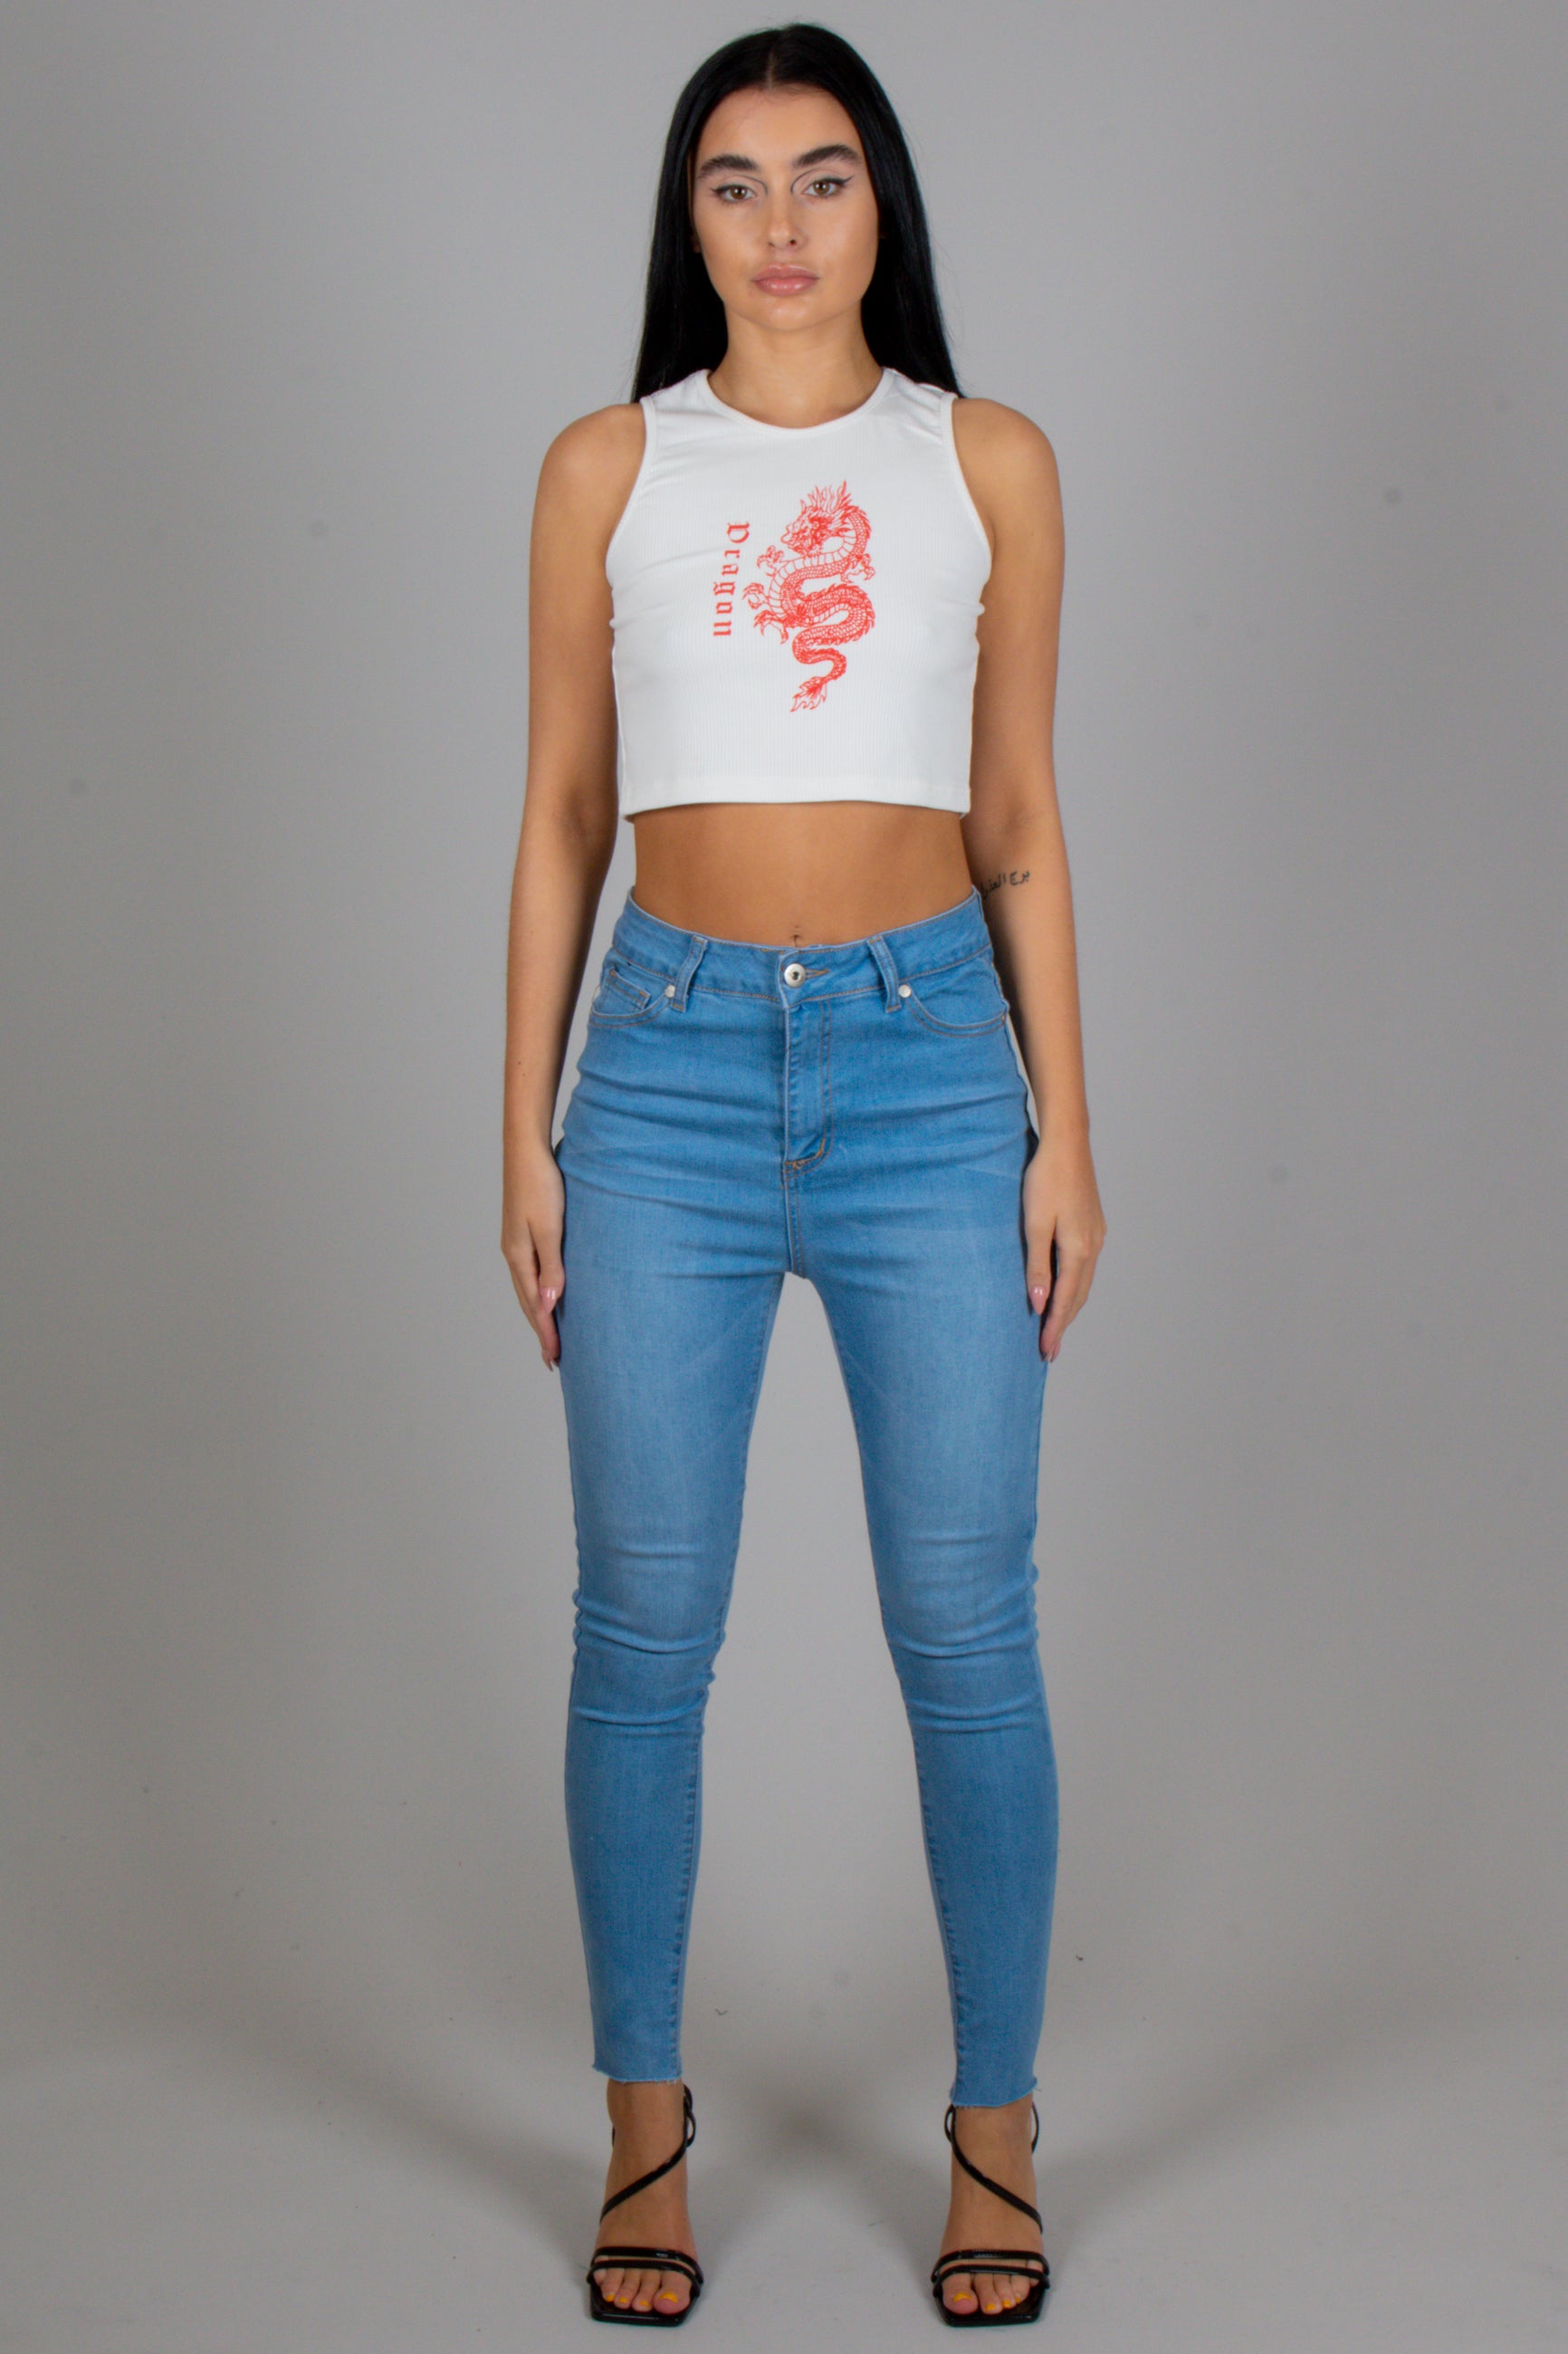 Back To Basics Skinny Jeans Made From Recycled Plastic Bottles And Organic Cotton Indigo